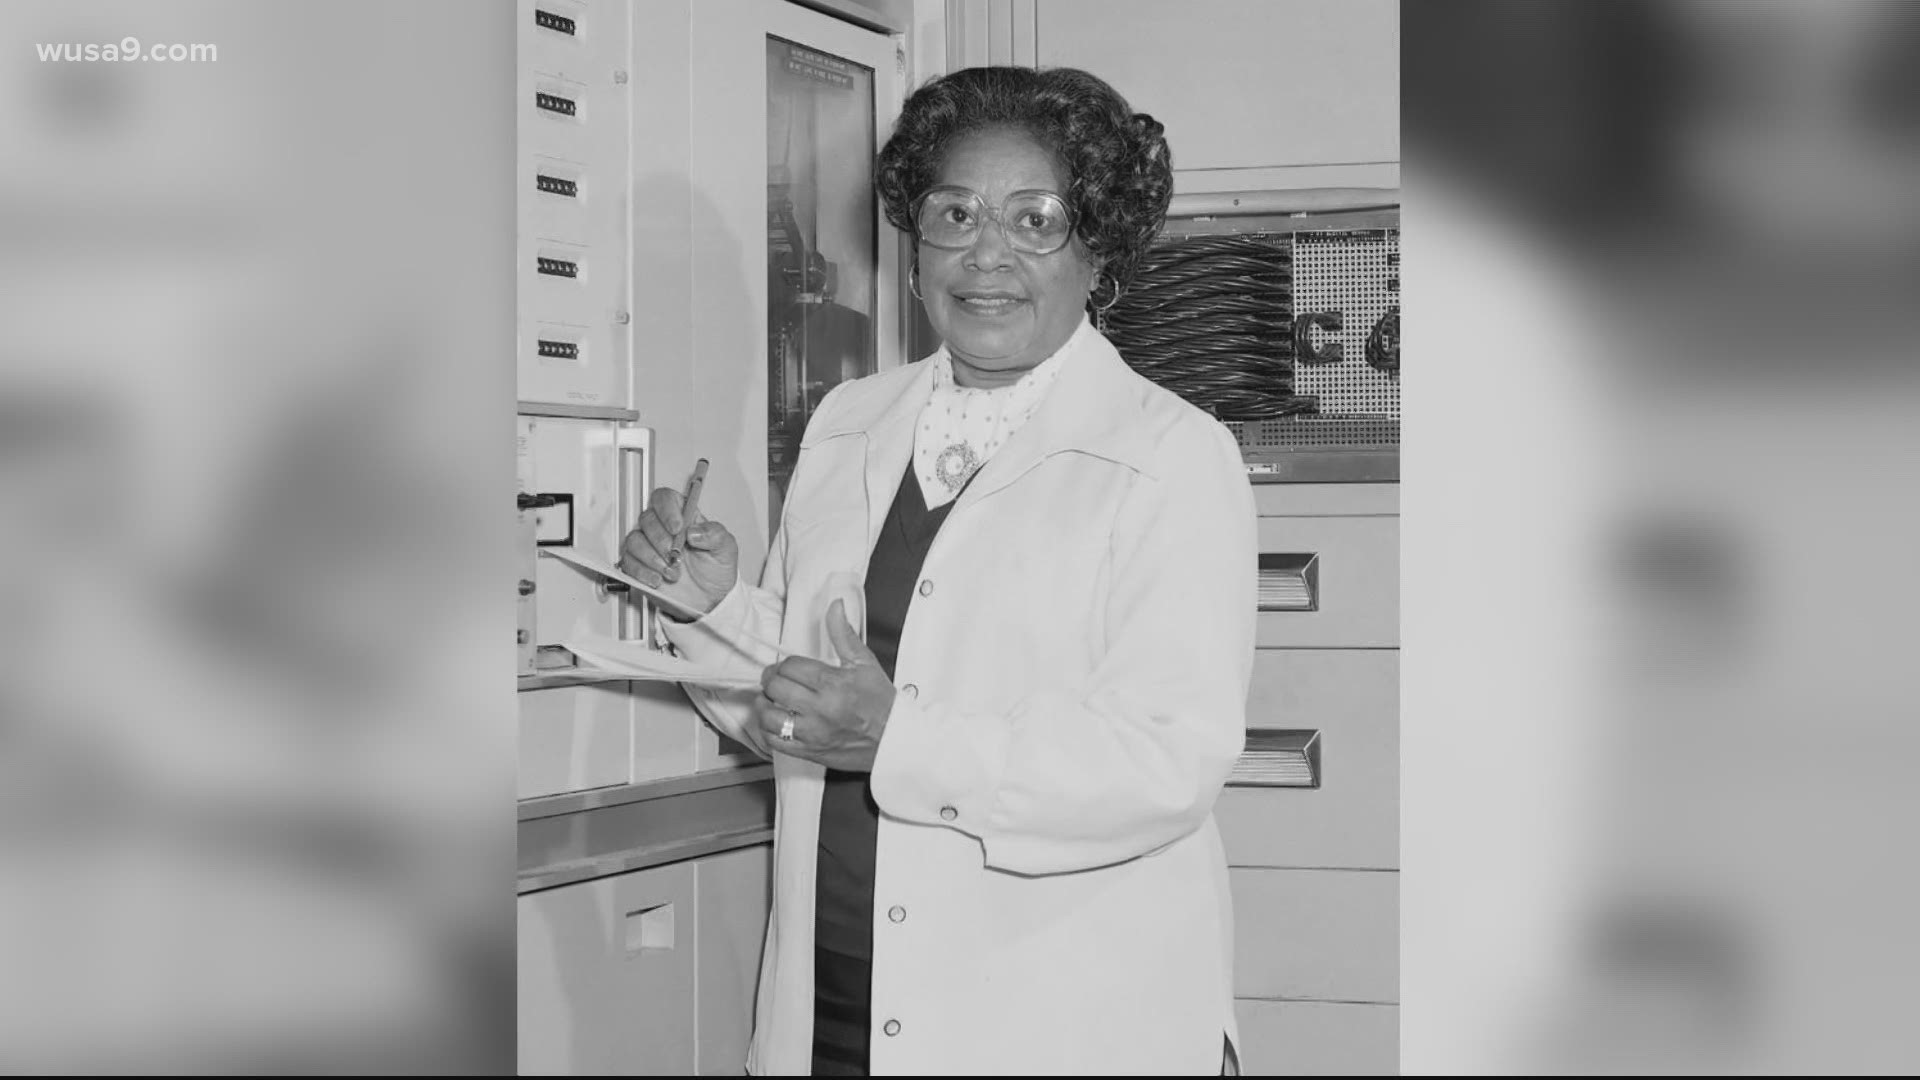 Mary Jackson was the very first Black female engineer at NASA. Now the agency's headquarters will bear her name.